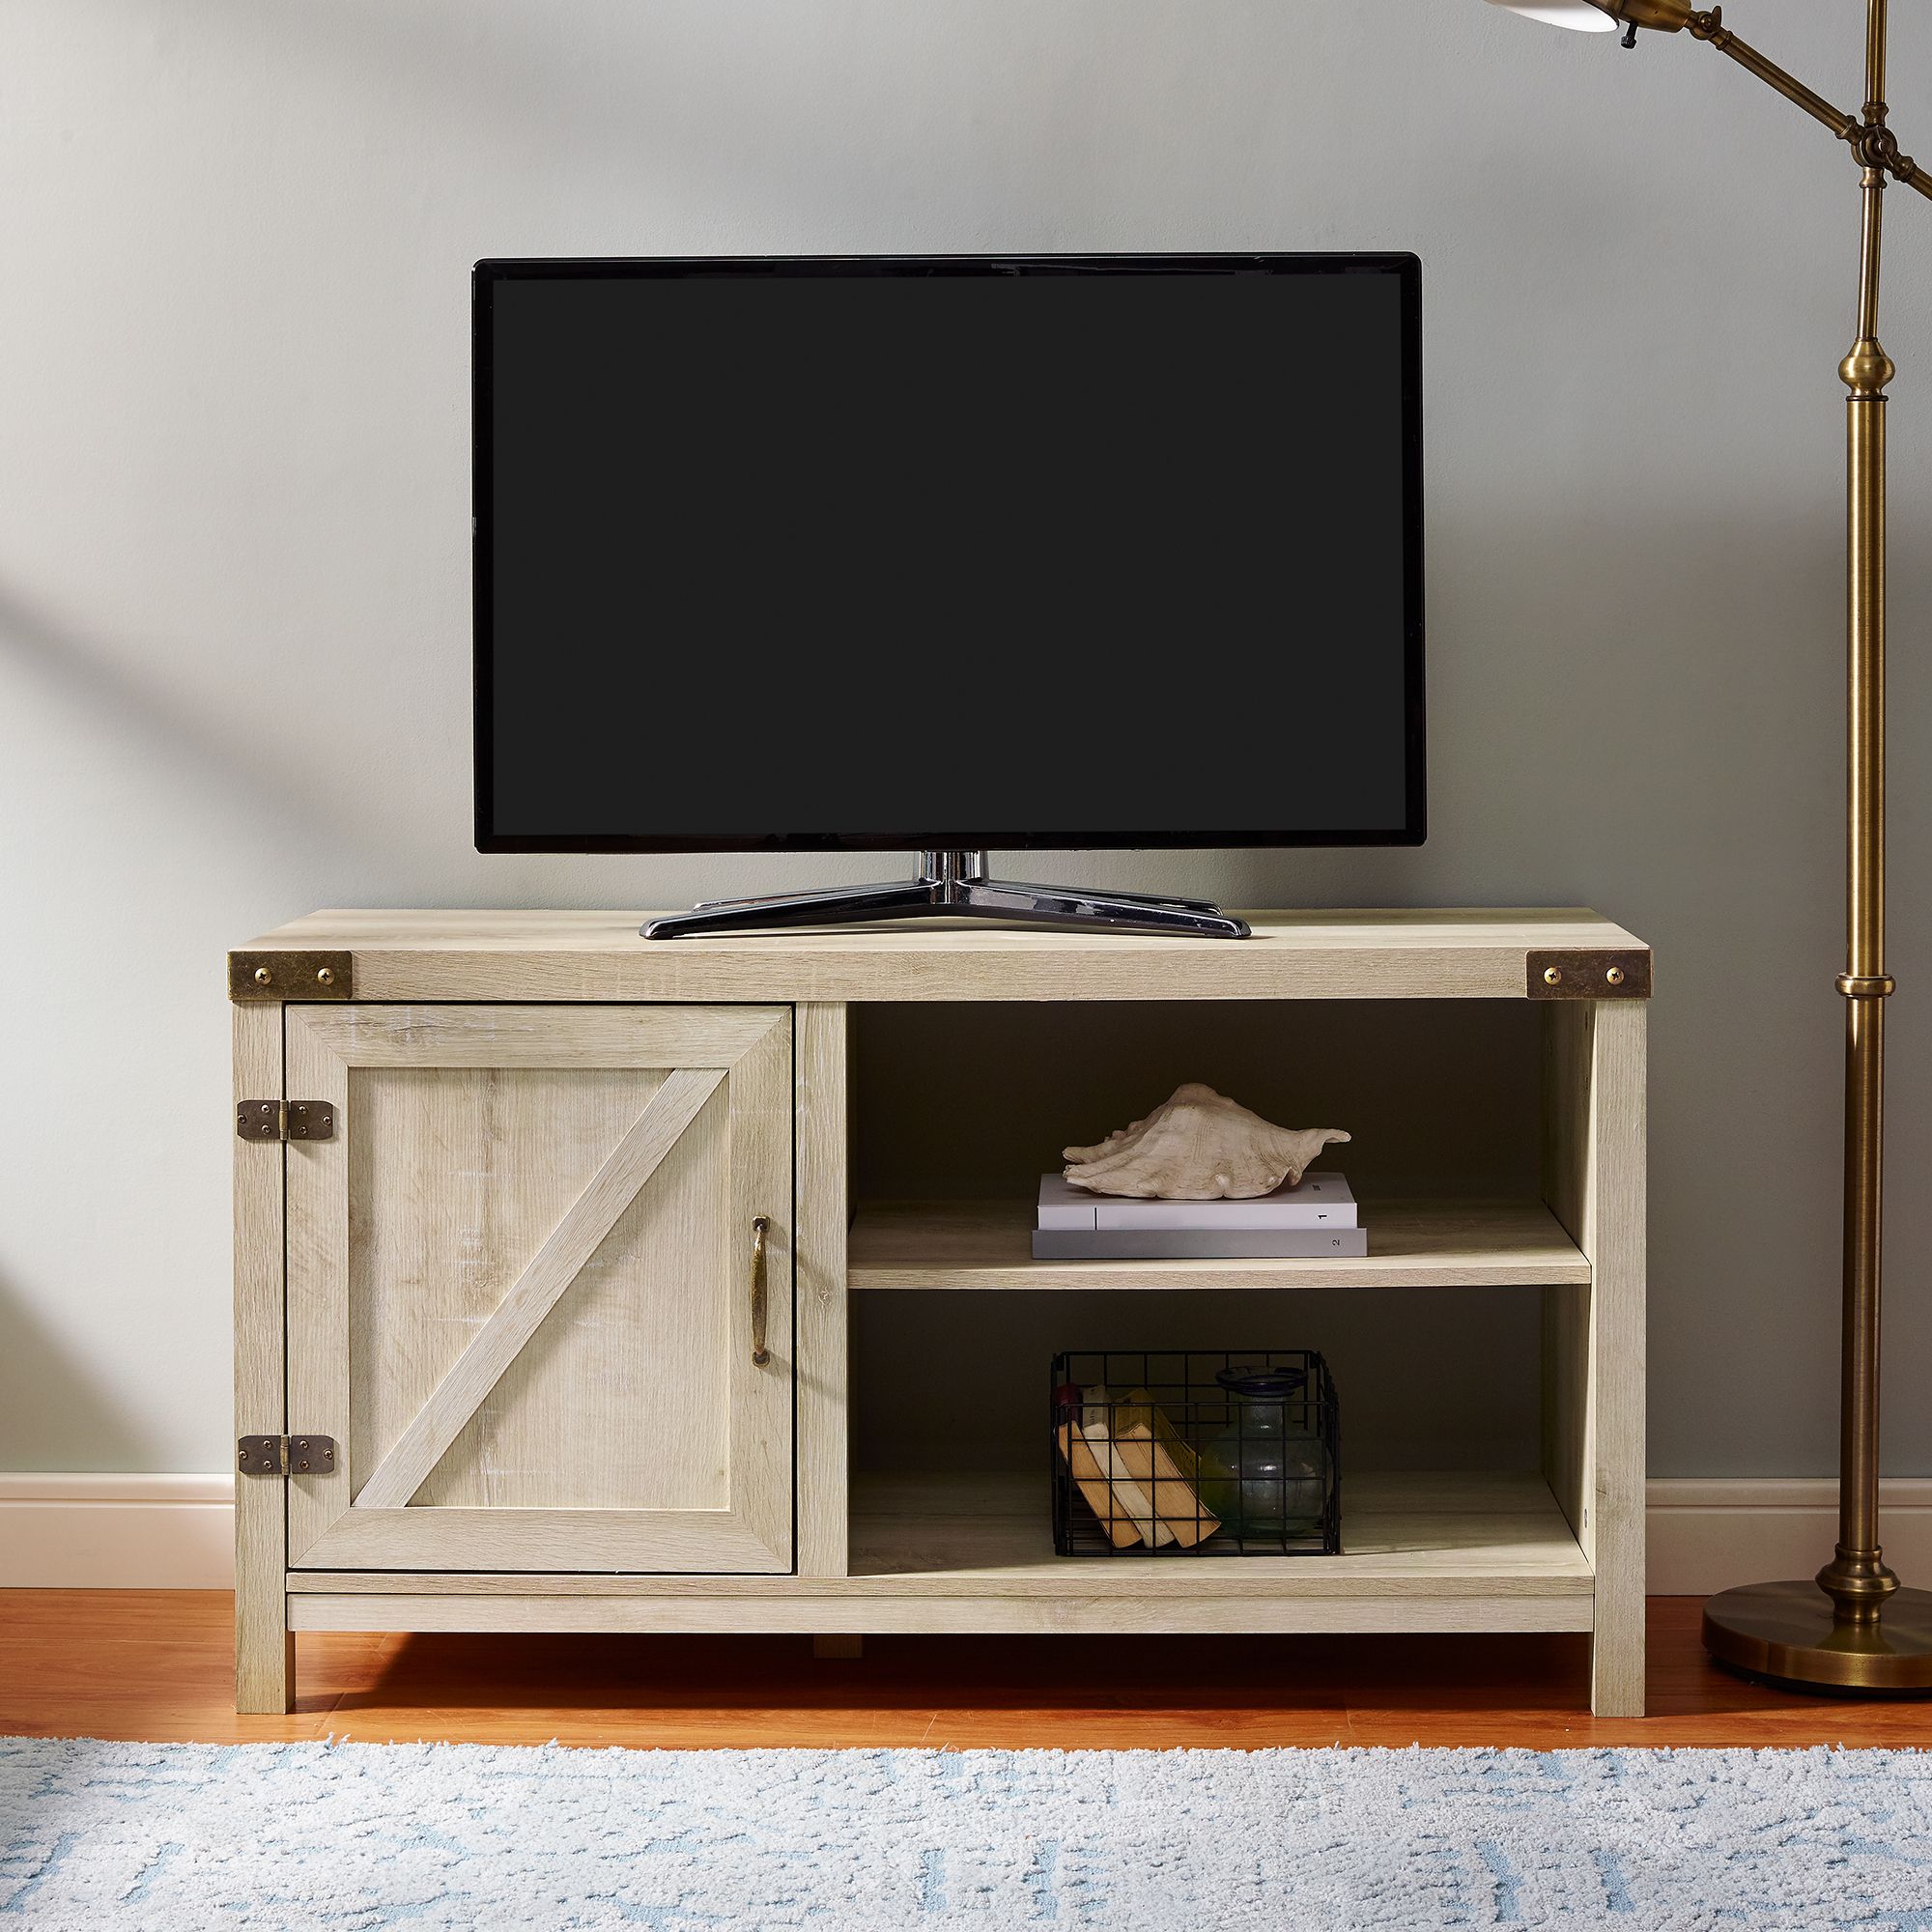 Woven Paths Farmhouse Barn Door Tv Stand For Tvs Up To 50 Pertaining To Virginia Tv Stands For Tvs Up To 50" (View 6 of 15)